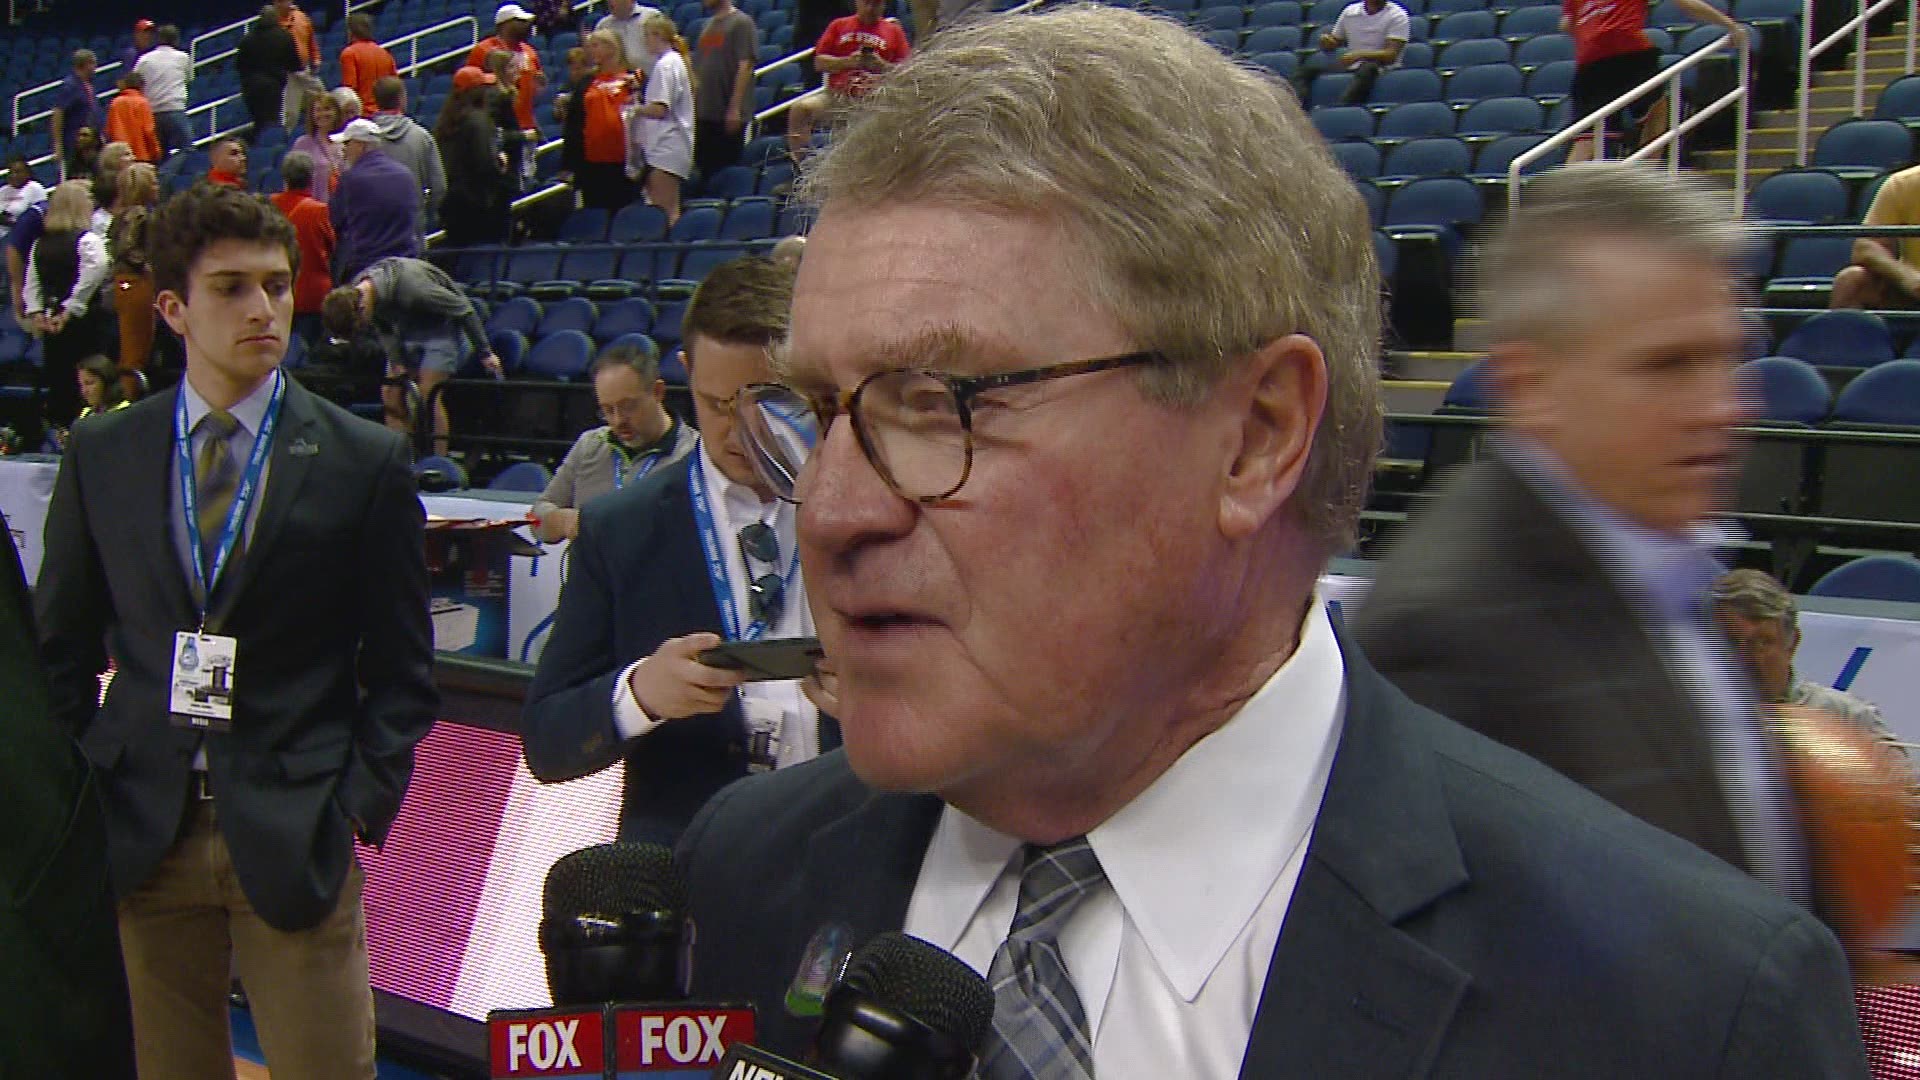 Commissioner John Swofford said the NBA's decision to suspend games along with the advice from medical experts played a big role in canceling the ACC Tournament.